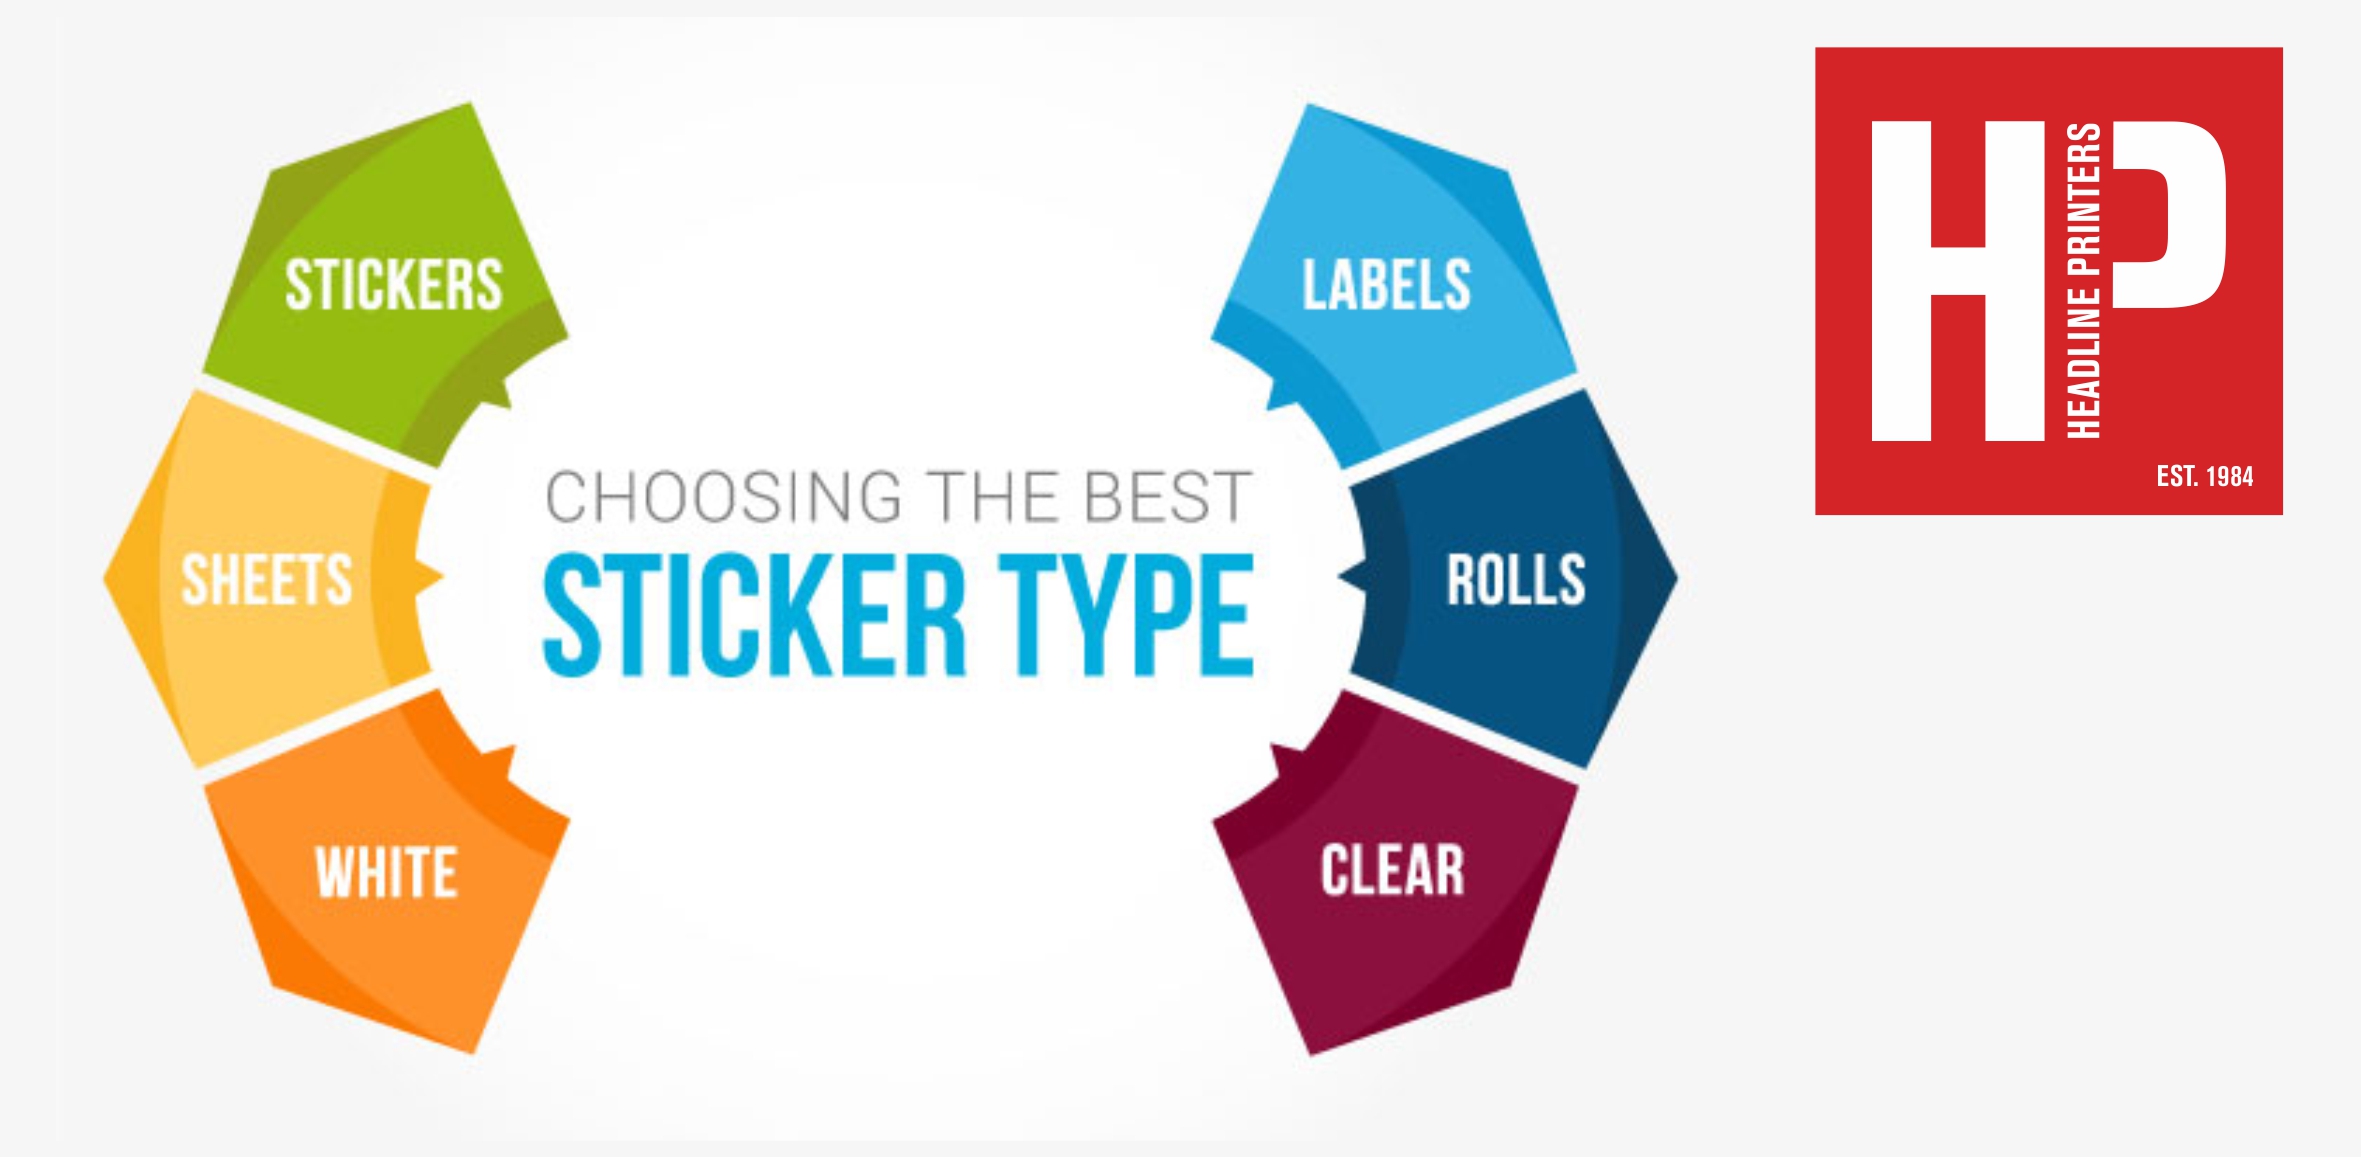 Sticker types: our guide to the materials on offer